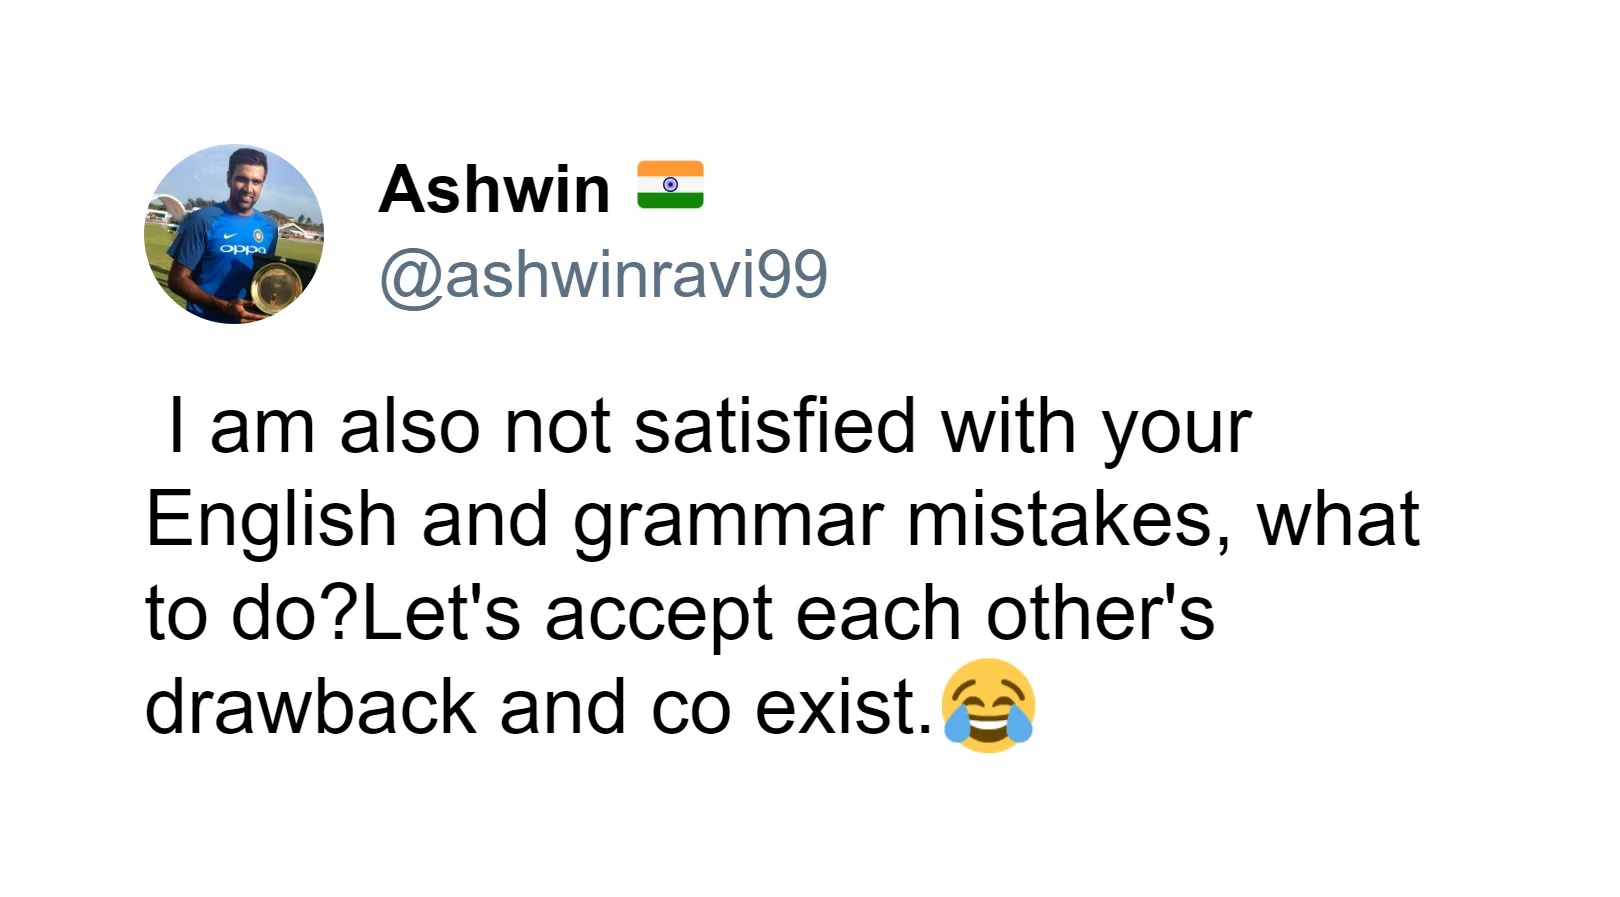 When Ravichandran Ashwin Hit Back At A MS Dhoni Fan For Questioning His Place In The Indian Test Team